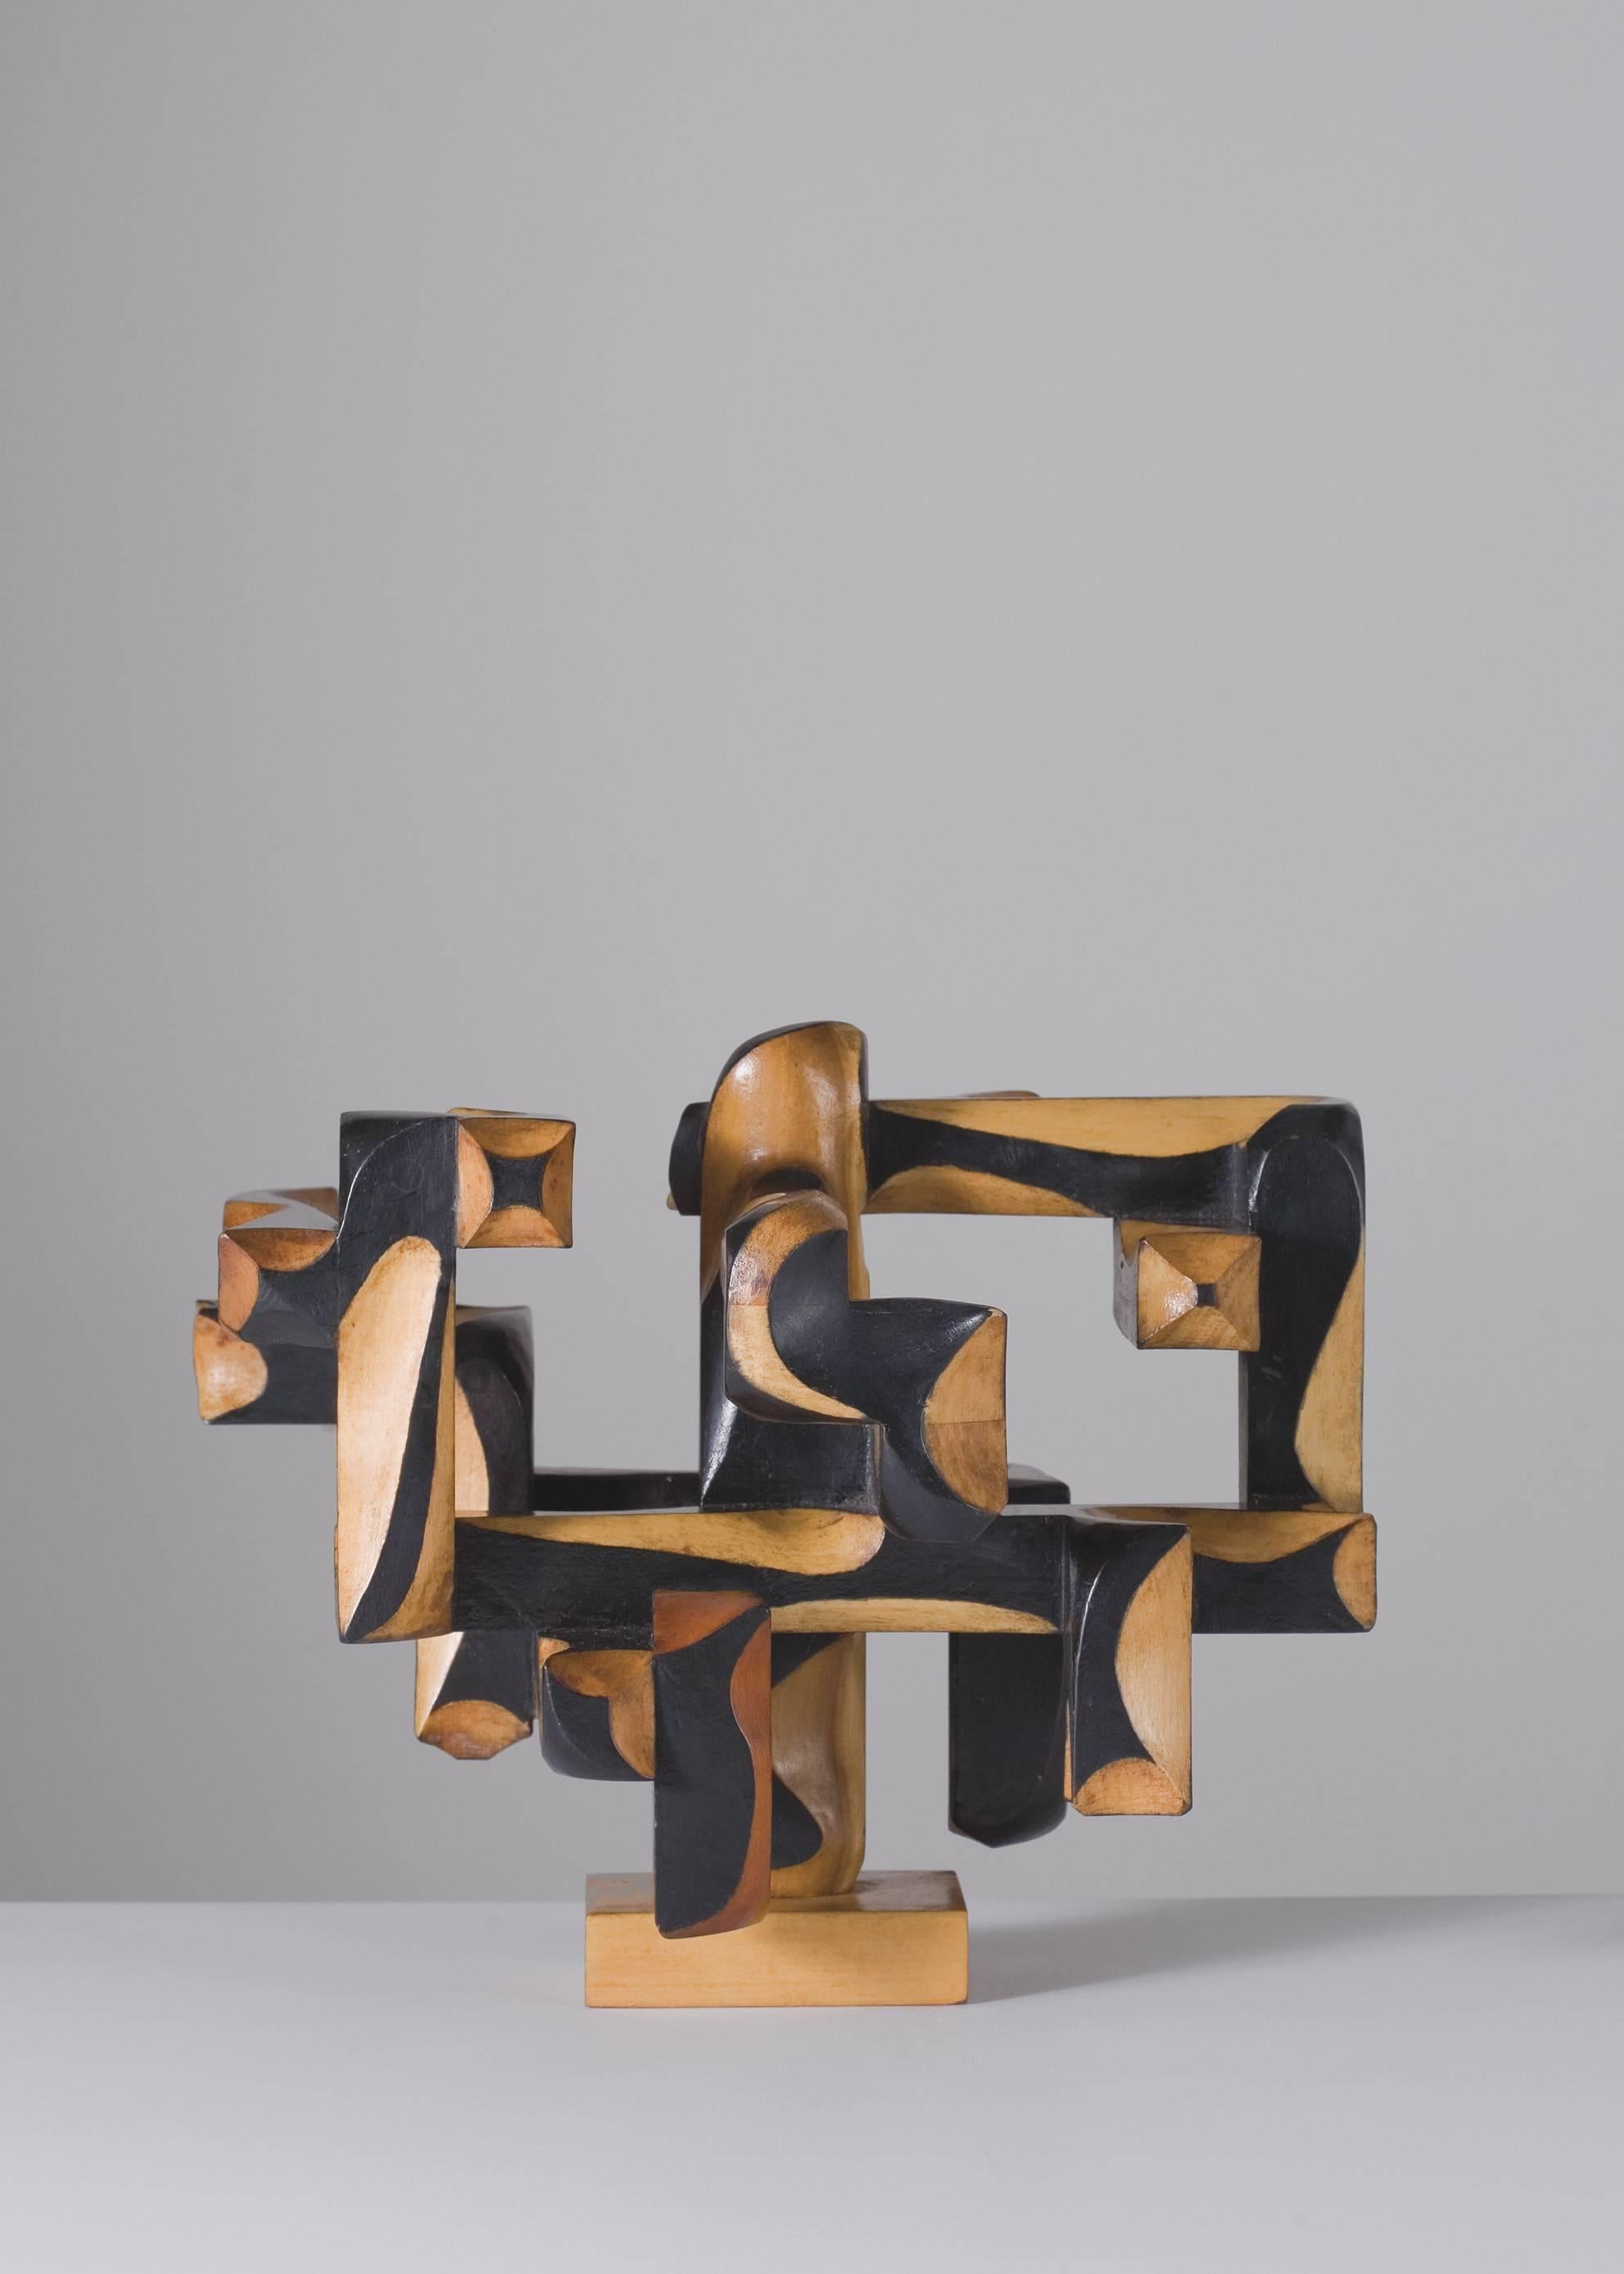 Typical of the sculptural output of dal Fabbro, the lines of this piece shift rhythmically depending on the viewer's position. The artist plays with the relationship between space and form, highlighting the way the piece's profile can change before